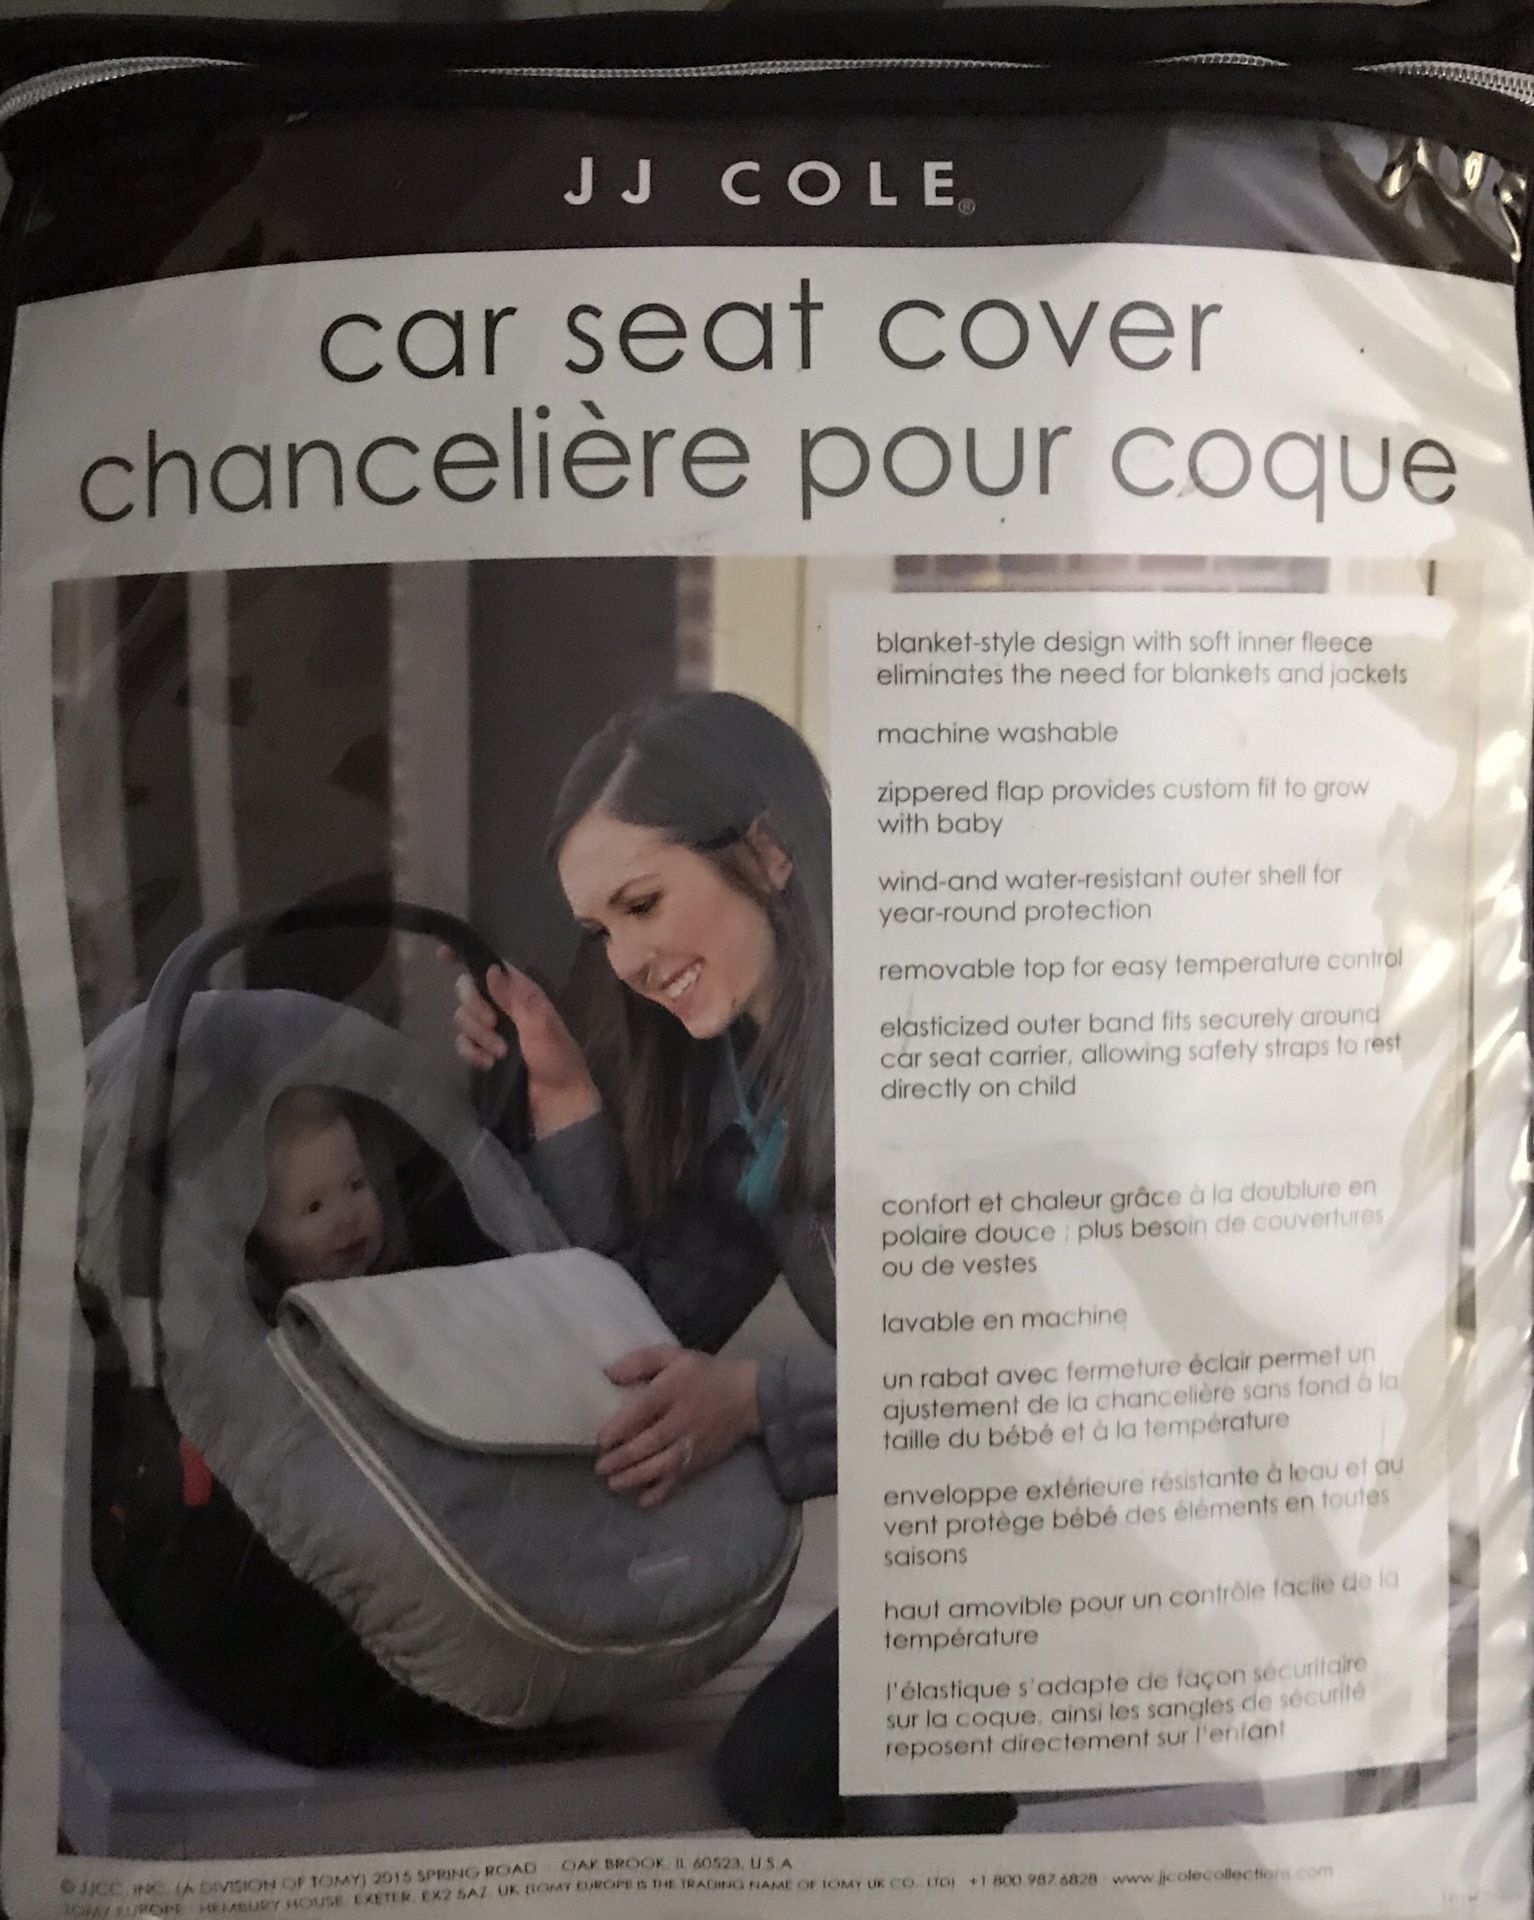 Car seat cover for cold weather